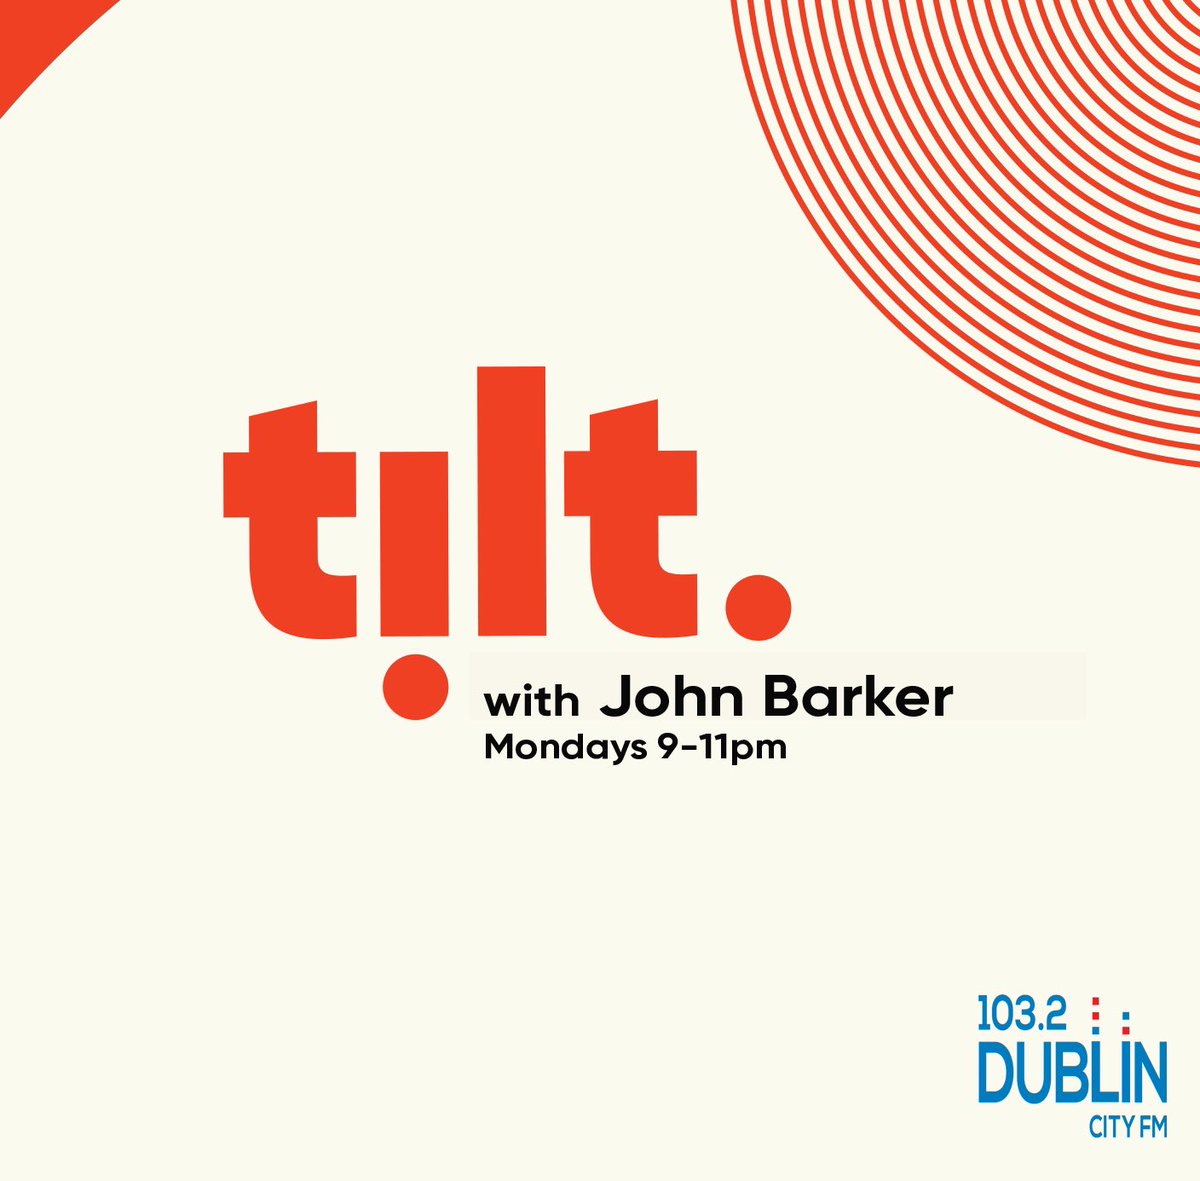 New music on tonight’s Tilt is brought to you by (part two): @thepatlagoon @Smooth_boiiiiii @SkullThePierre @ESSIRAYMusic @Caoivin @RiaRuaMusic @fivetotwo @GarethQR @KrystalKlear @mhaolmusic Tune in to @dublincityfm from 9pm